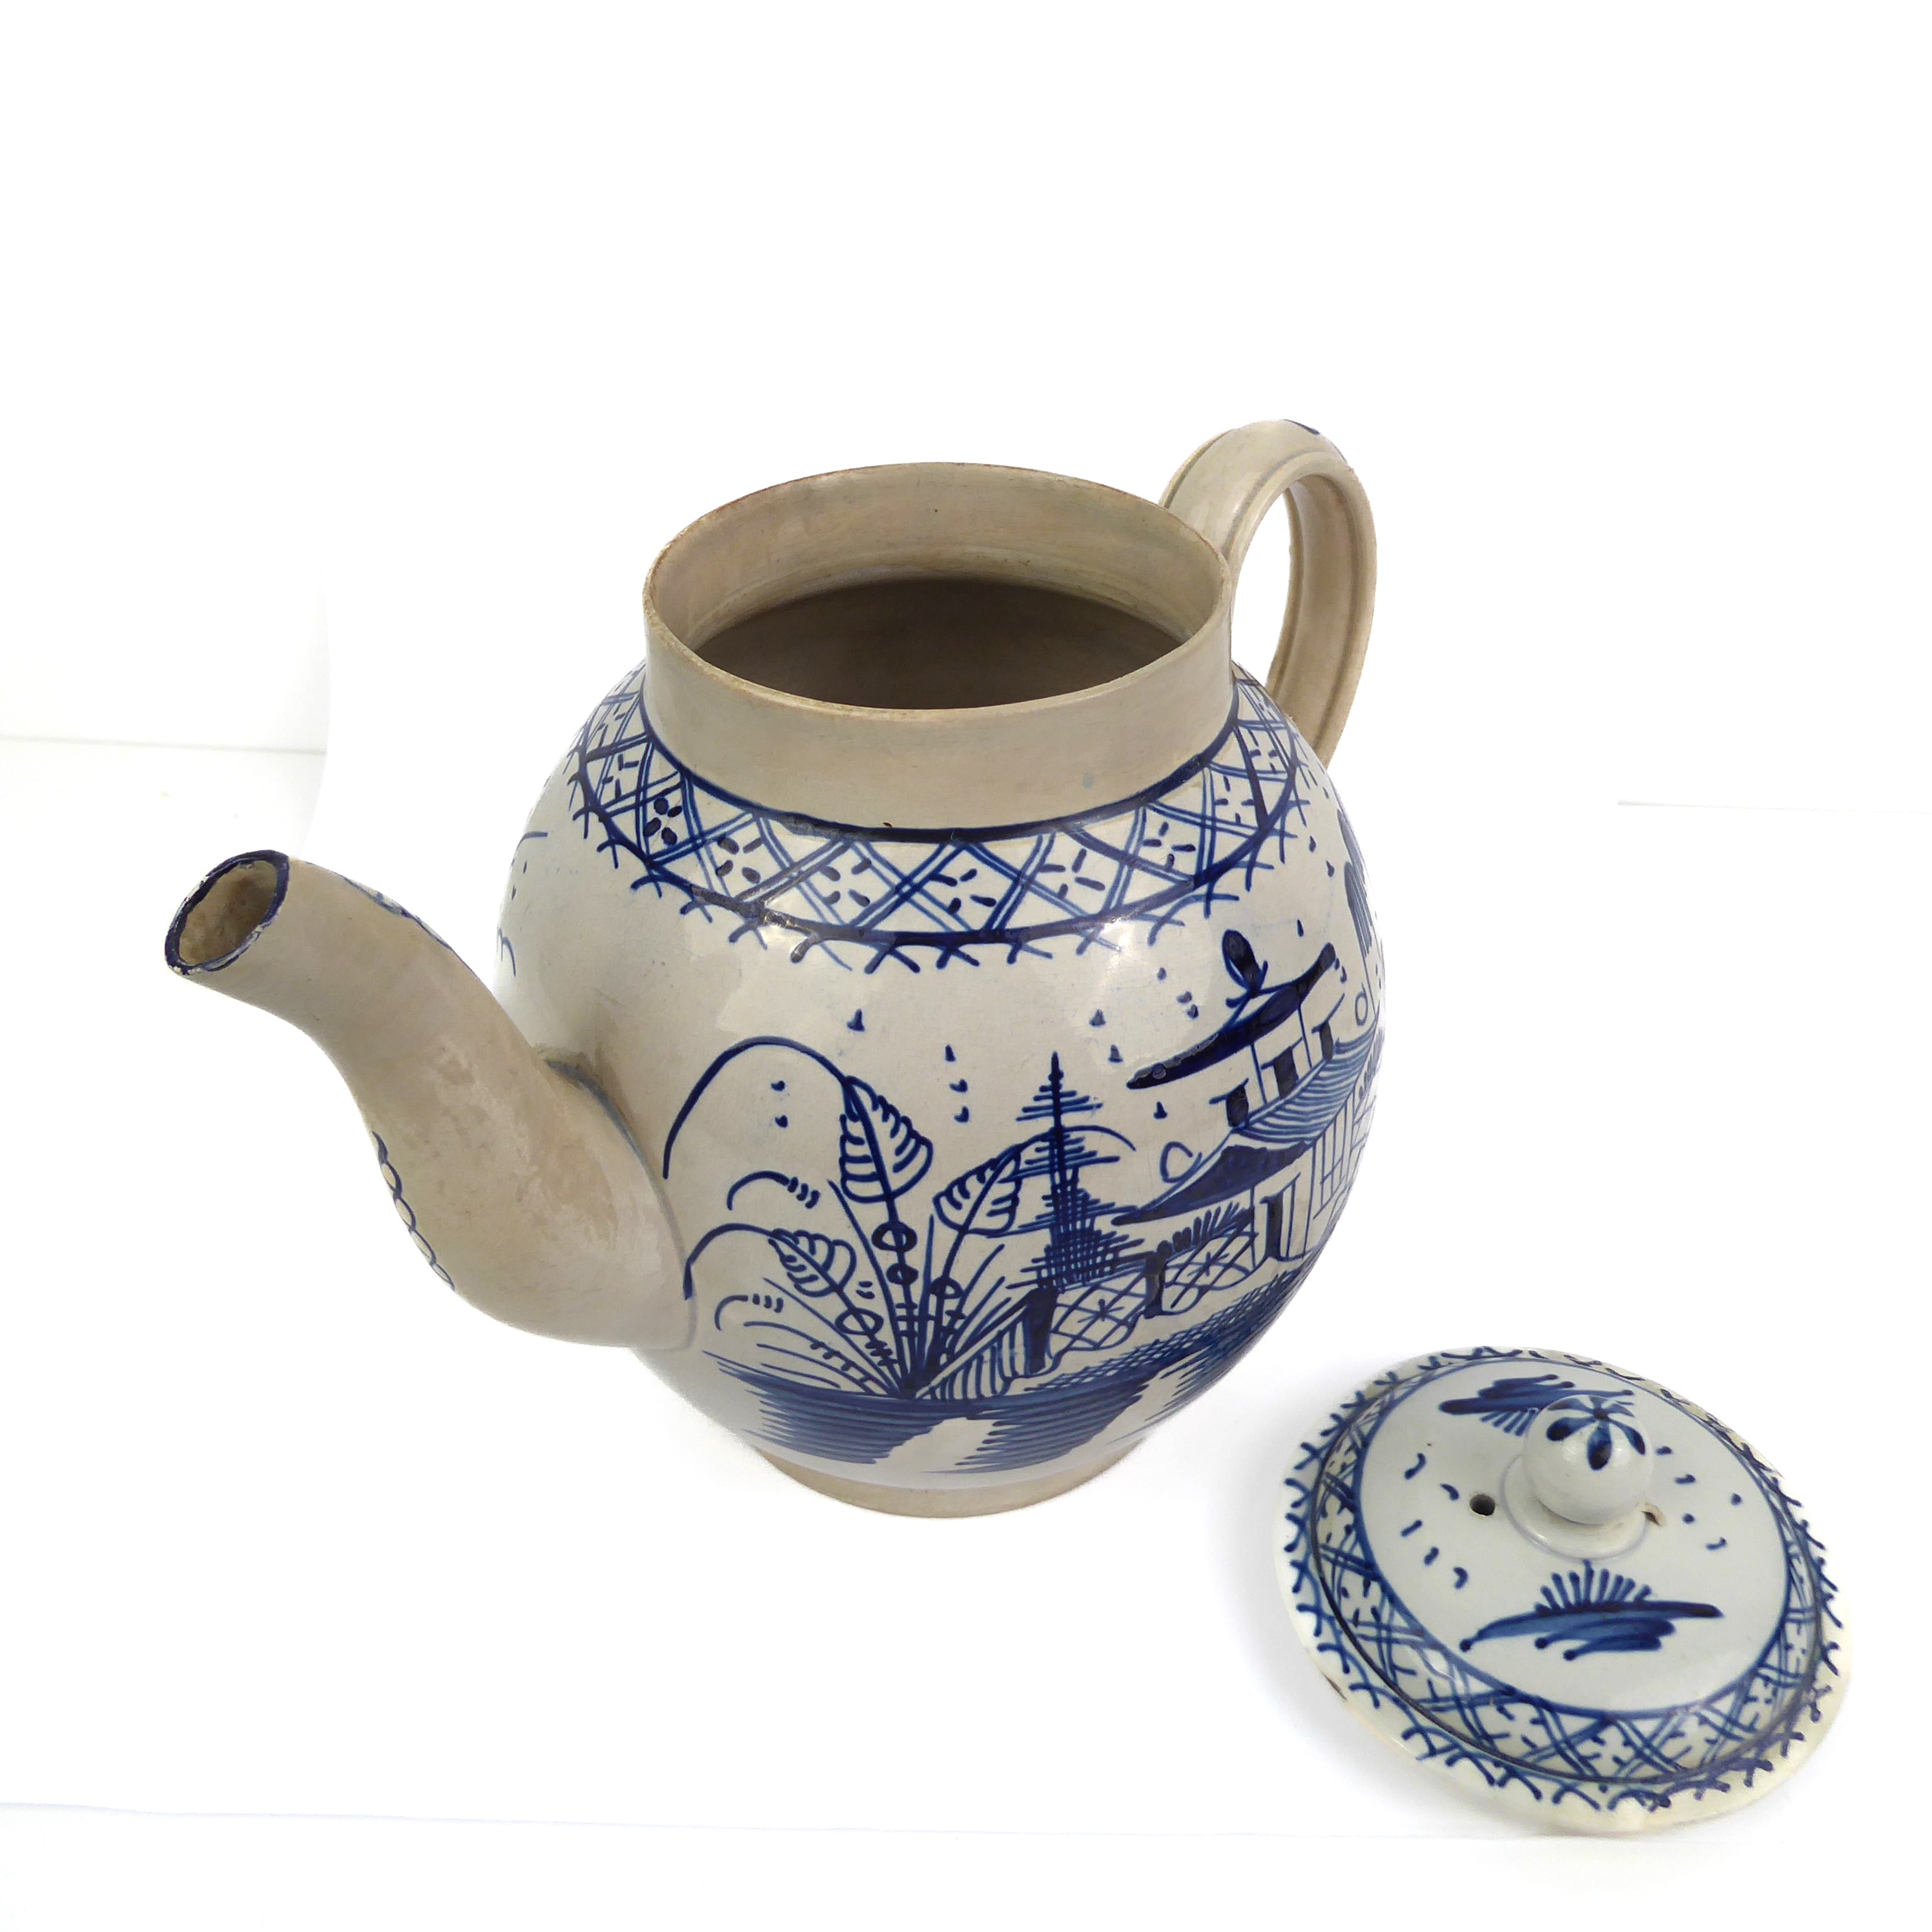 A late 18th century English pearlware hand-painted teapot with blue and white floral design (with - Image 5 of 6